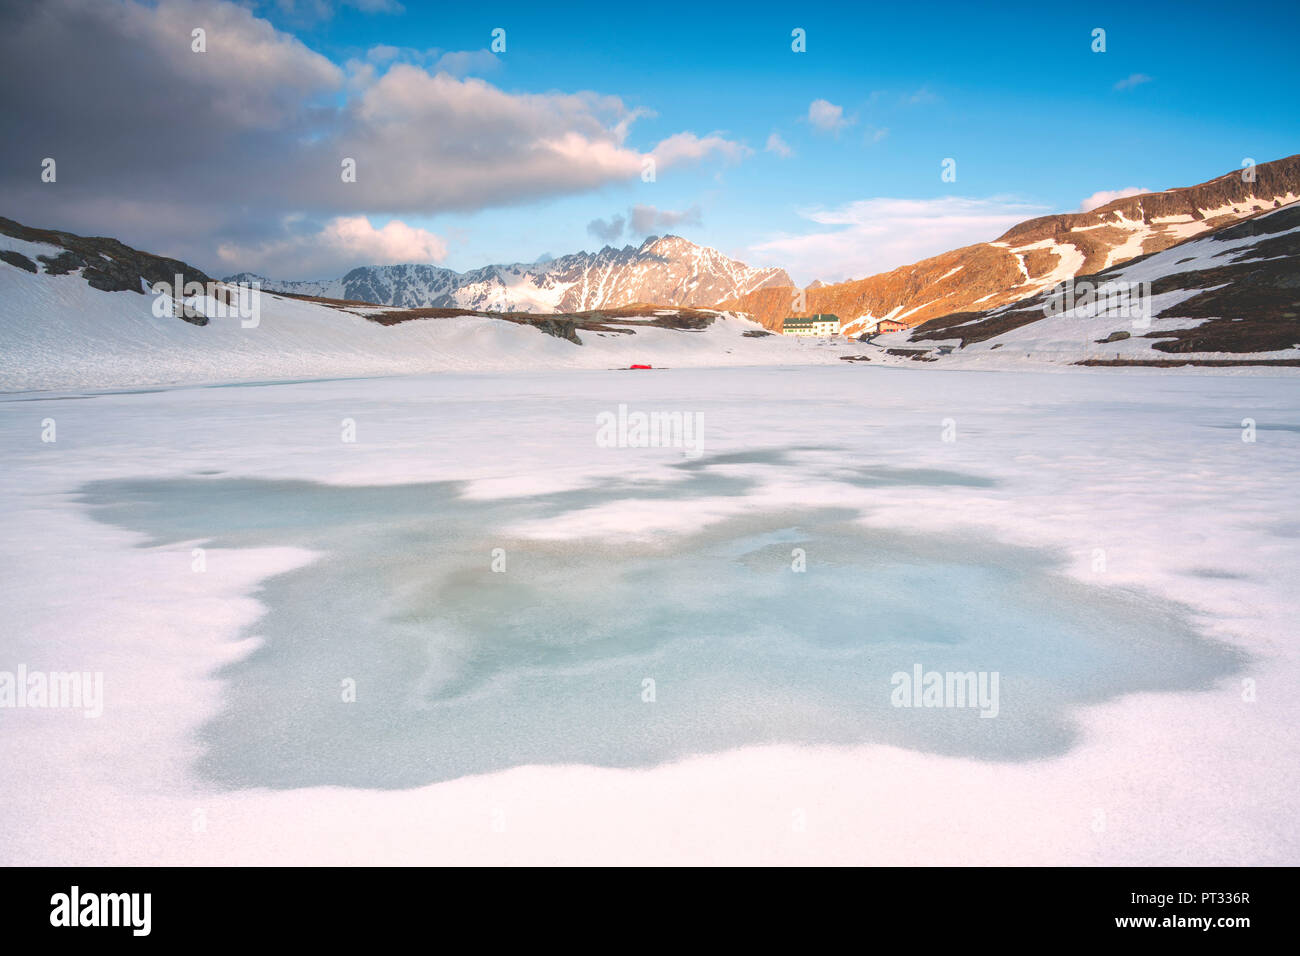 Thaw at Gavia pass, Lombardy district, Brescia province, Italy, Stock Photo